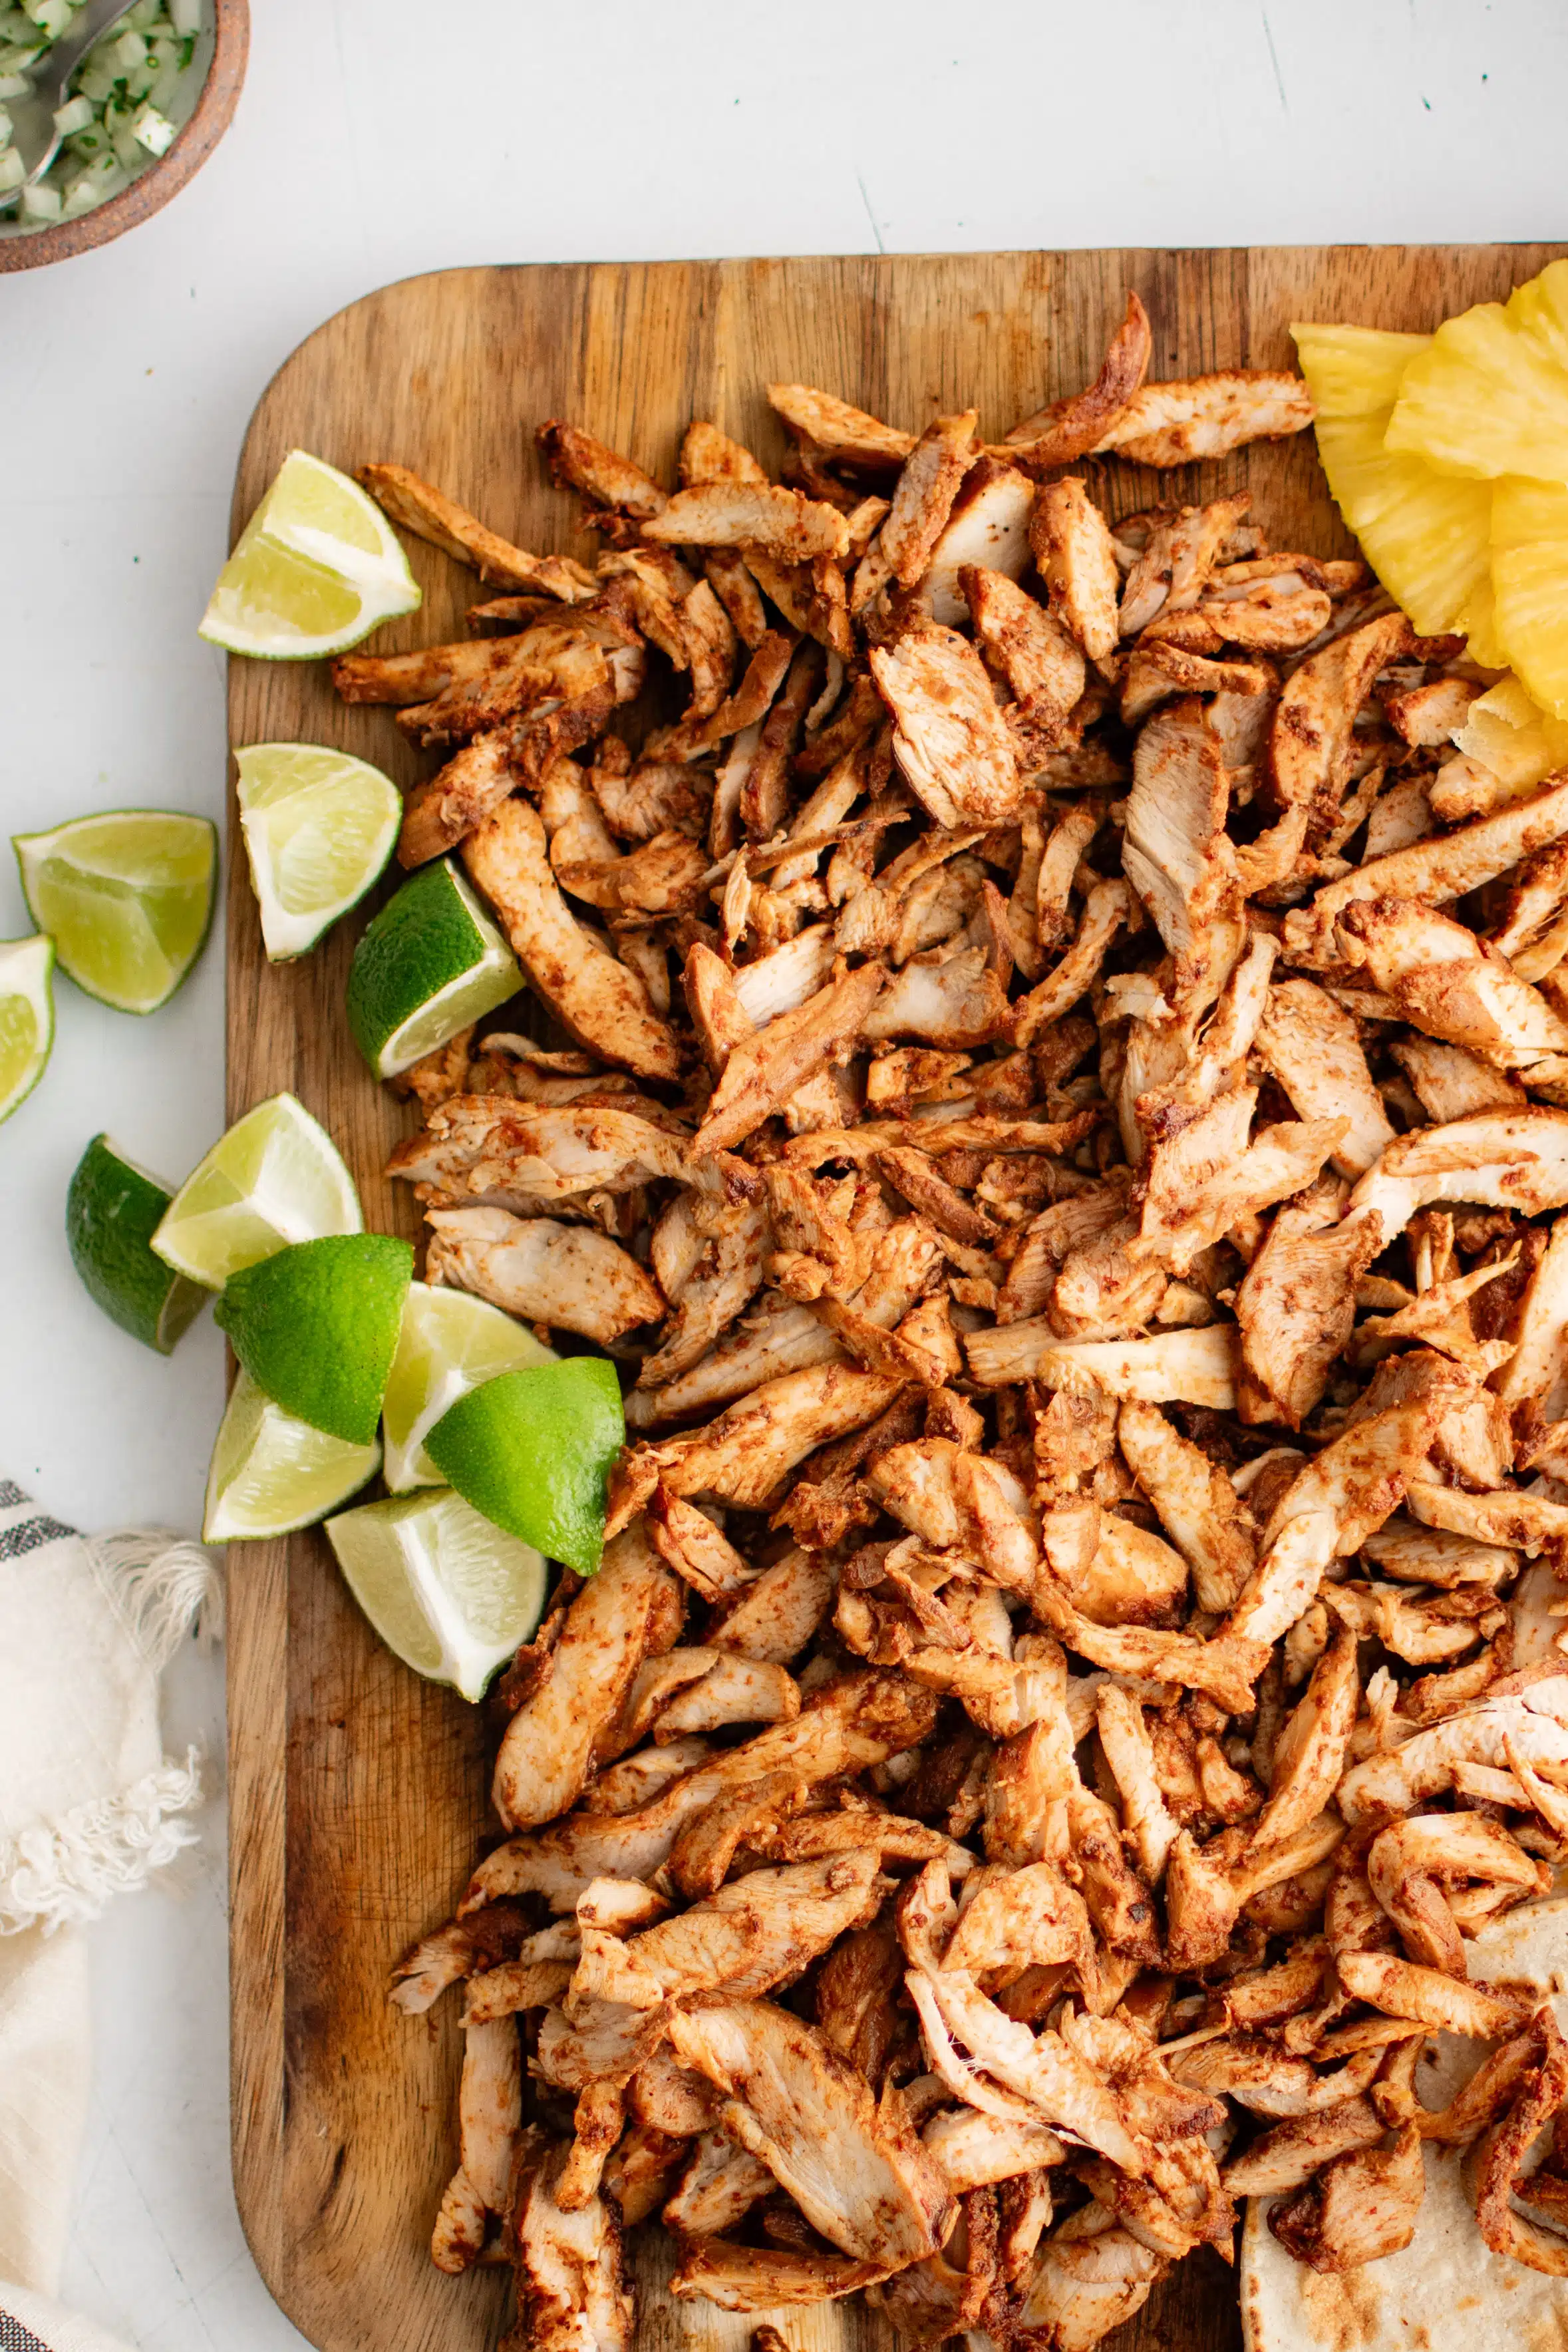 Thinly sliced chicken al pastor arranged over a large cutting board and served with sliced pineapple, flour tortillas, and lime wedges.